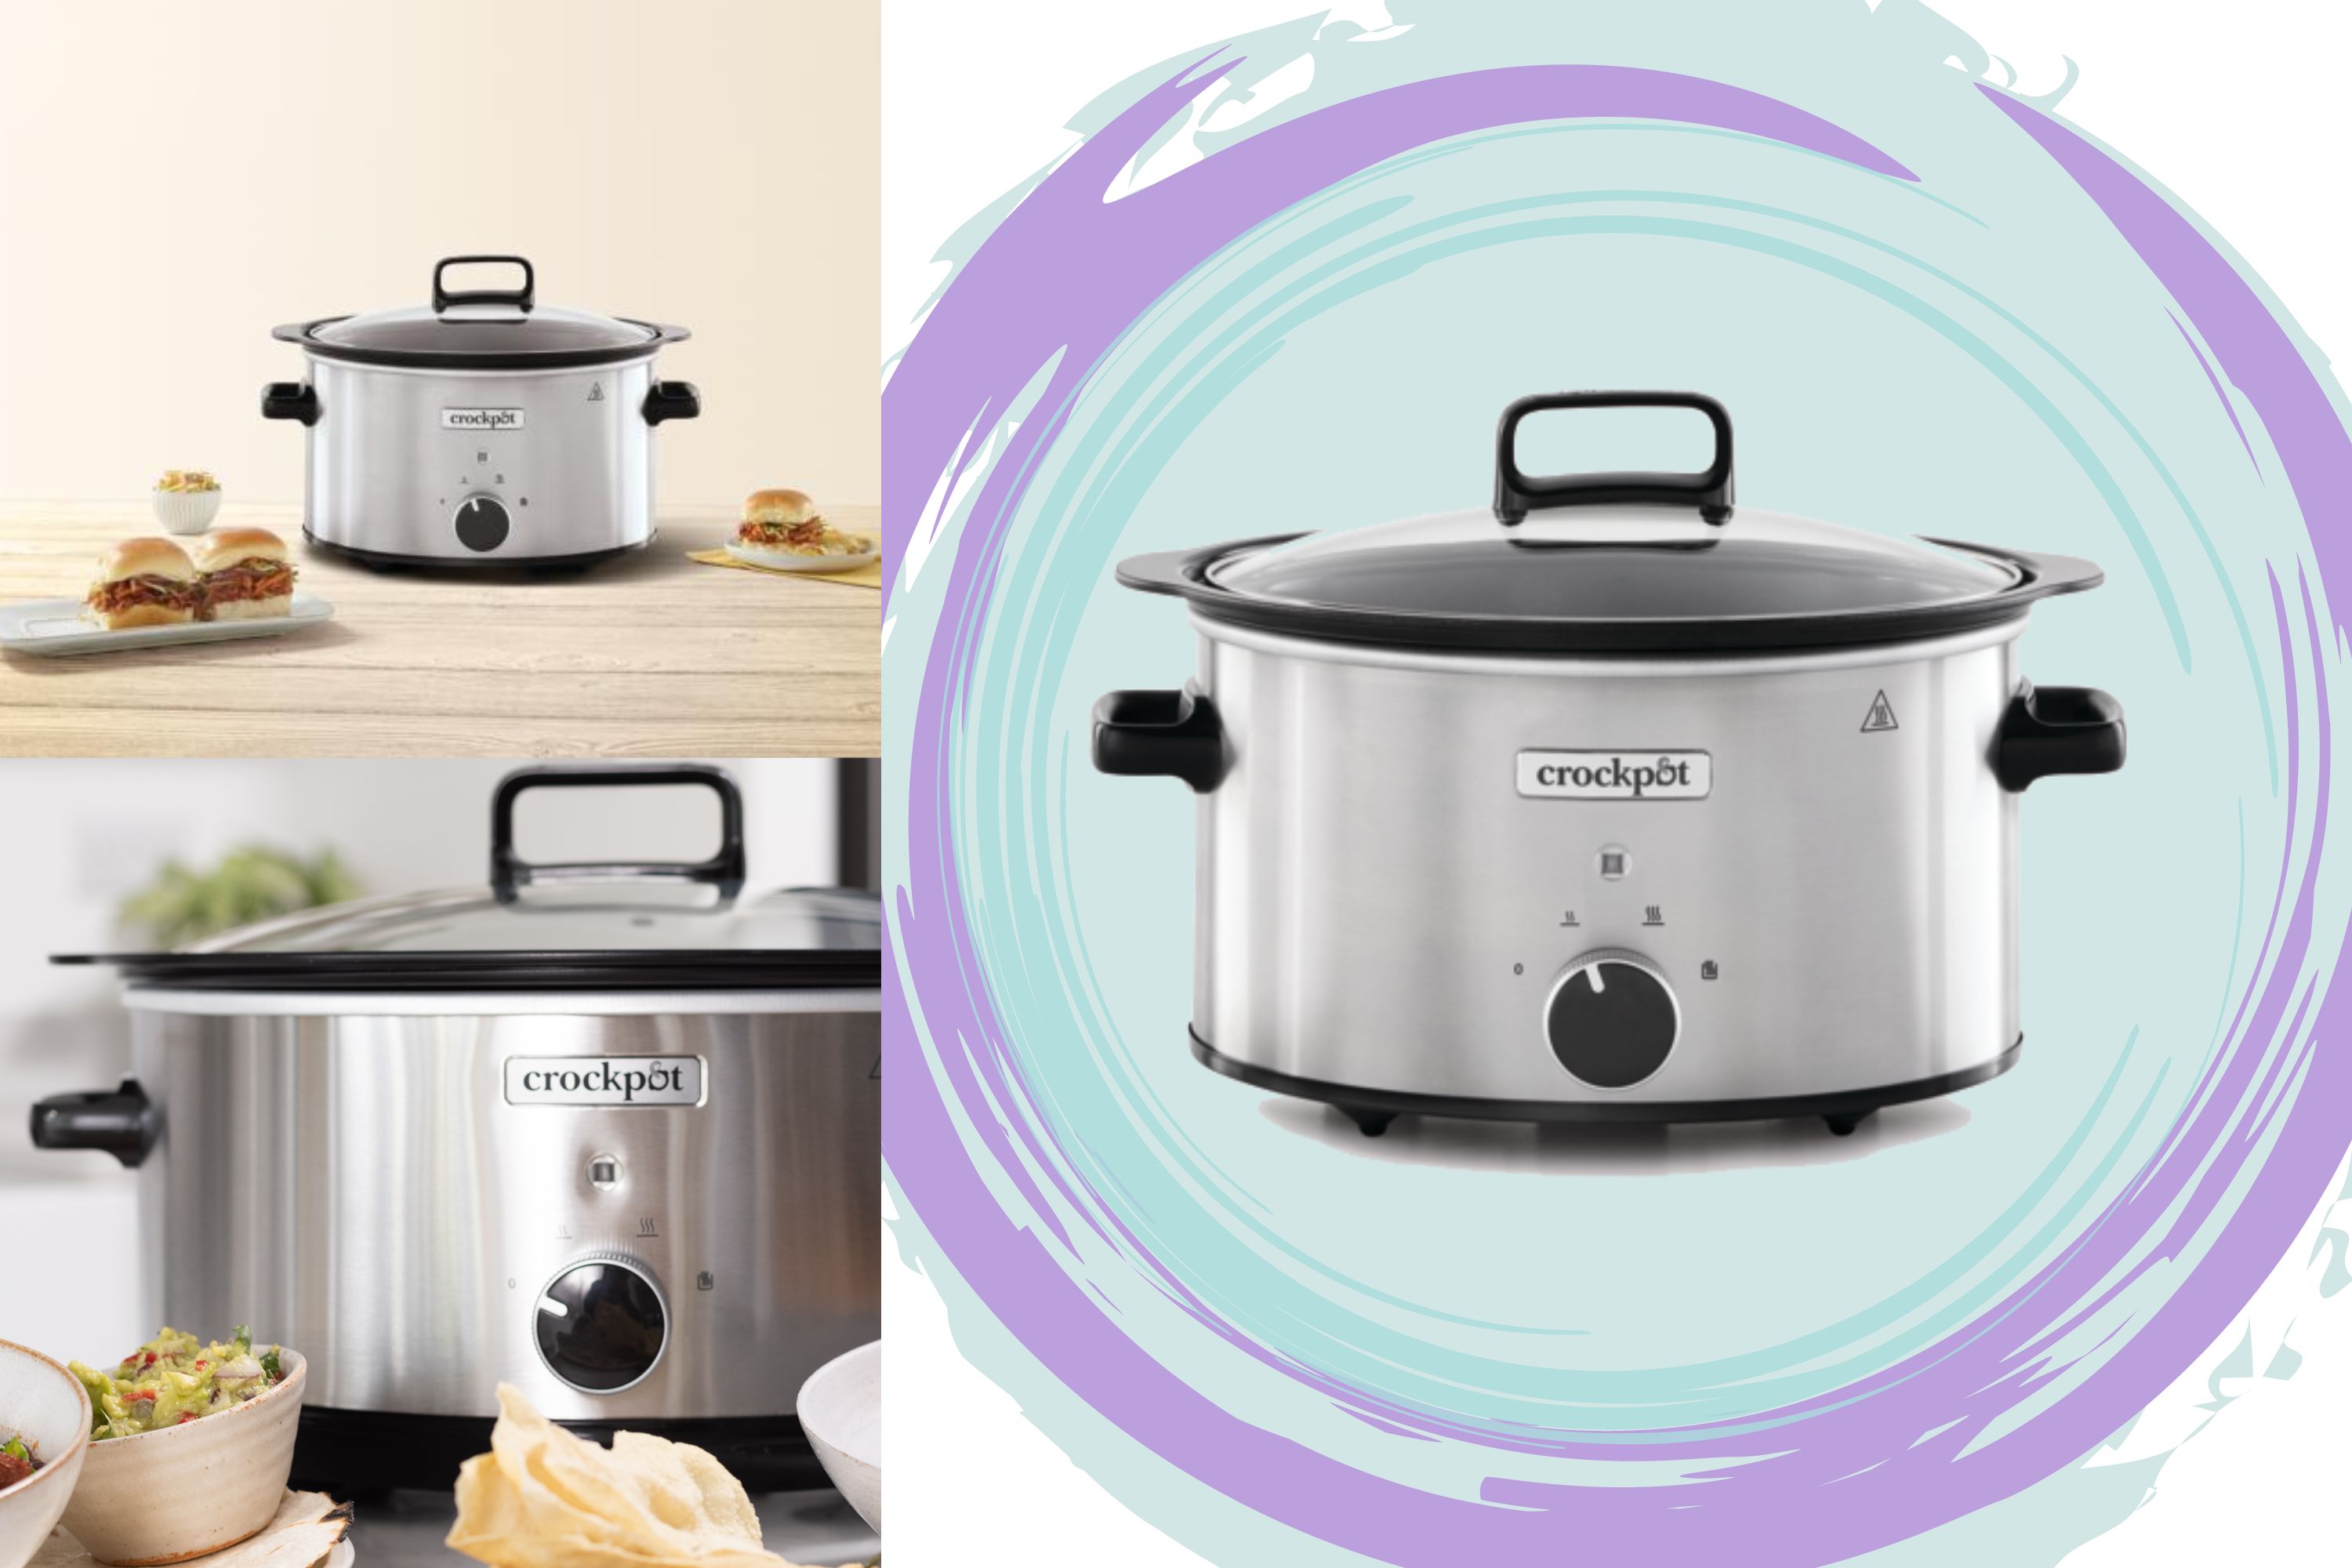 Crockpot 3.5L Sizzle & Stew Manual Slow Cooker review | GoodTo